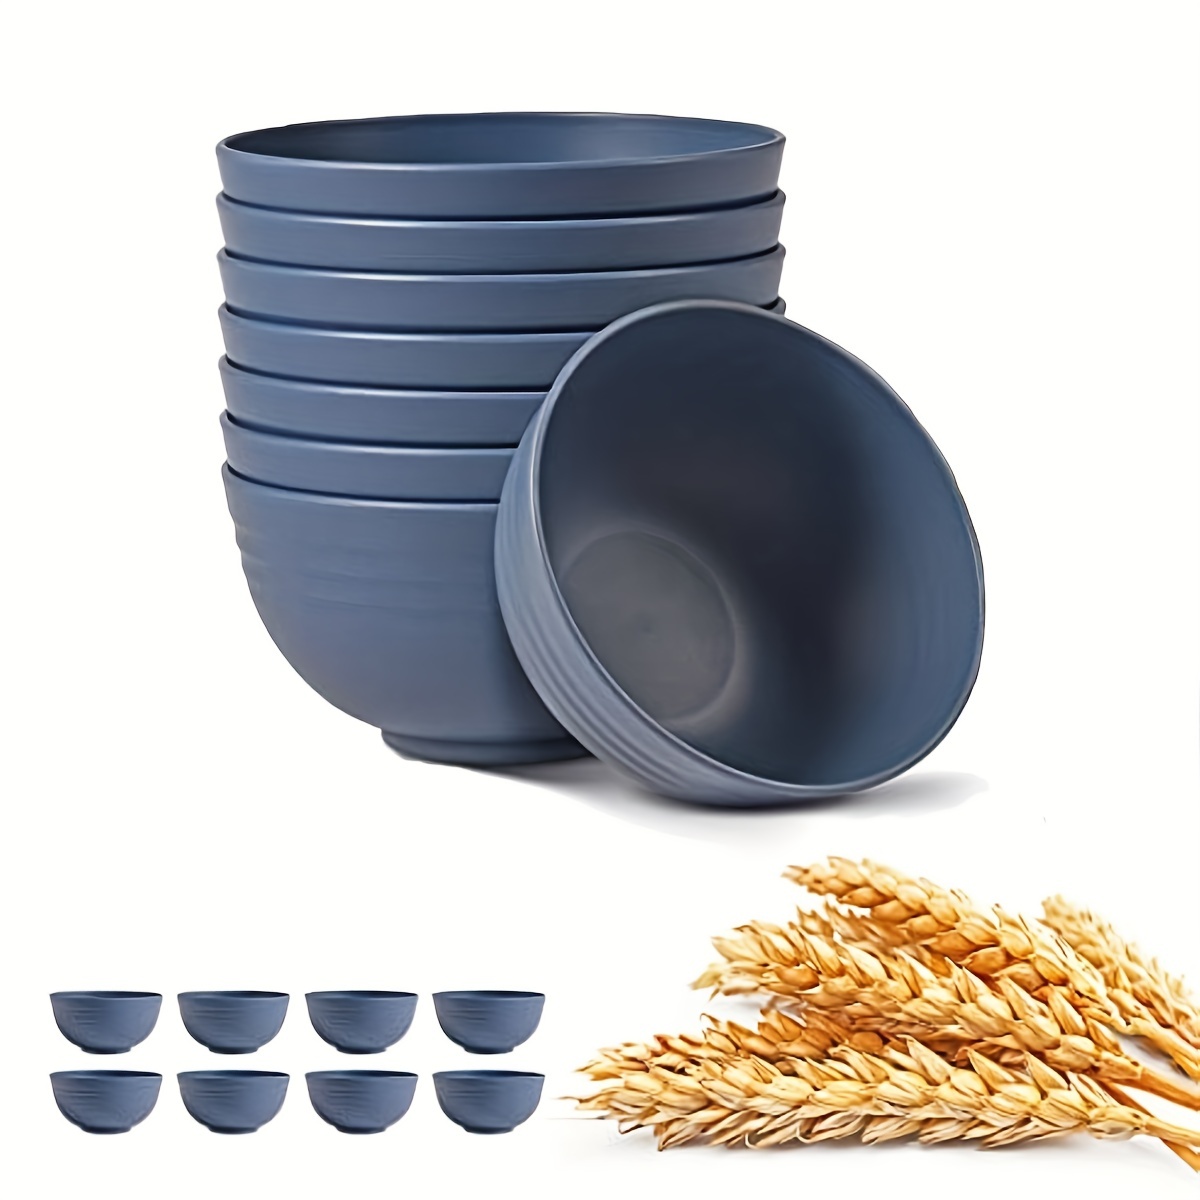 Camping Perfected: Spiral Slide Partitioned Cereal Bowl